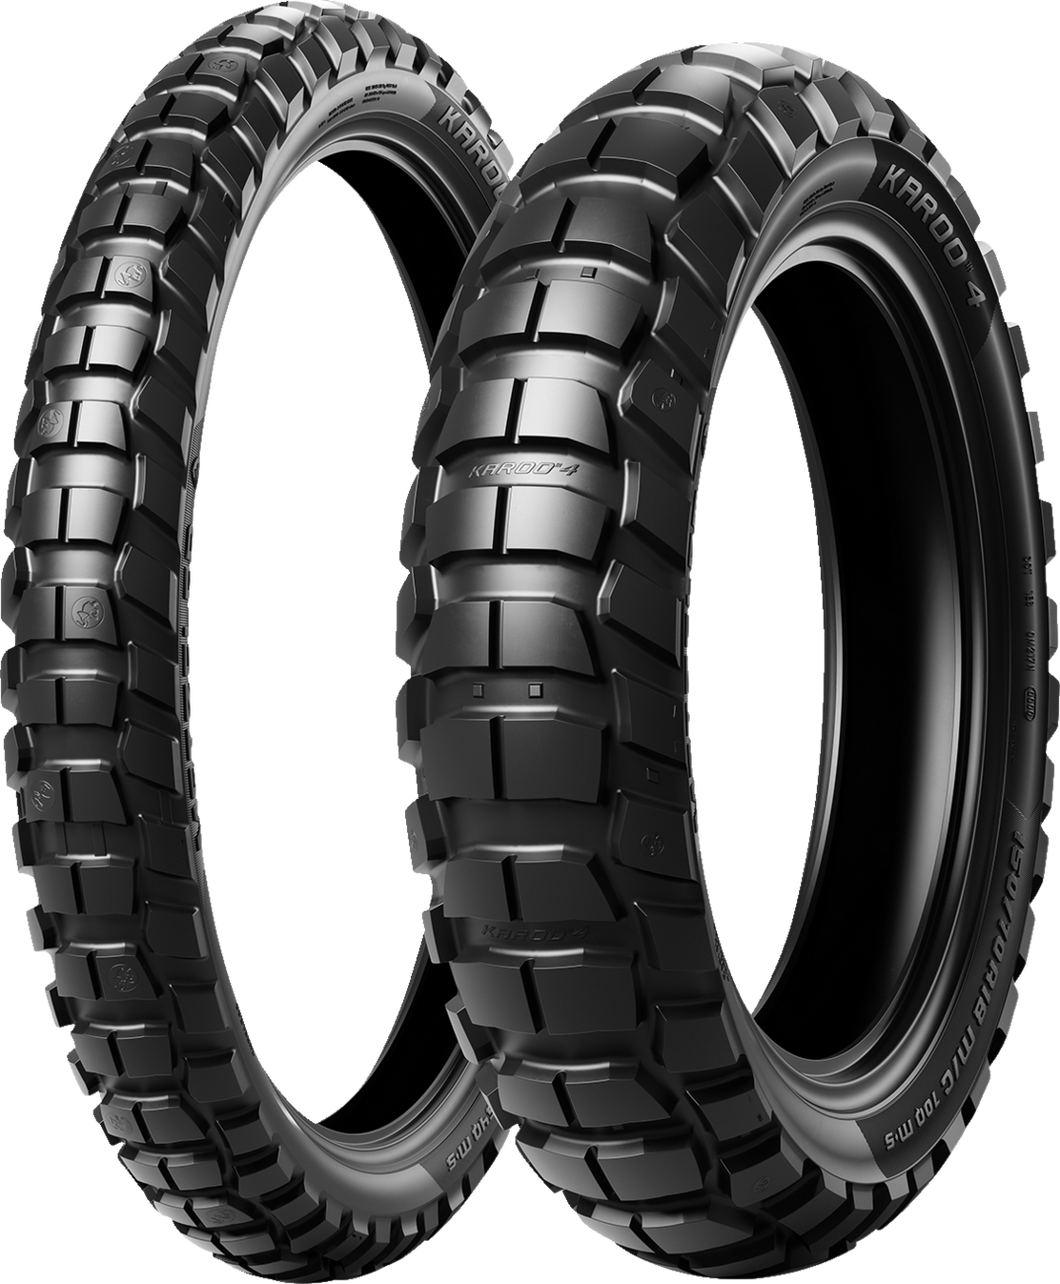 Tire - Karoo 4 - Front - 110/80R19 - 59T